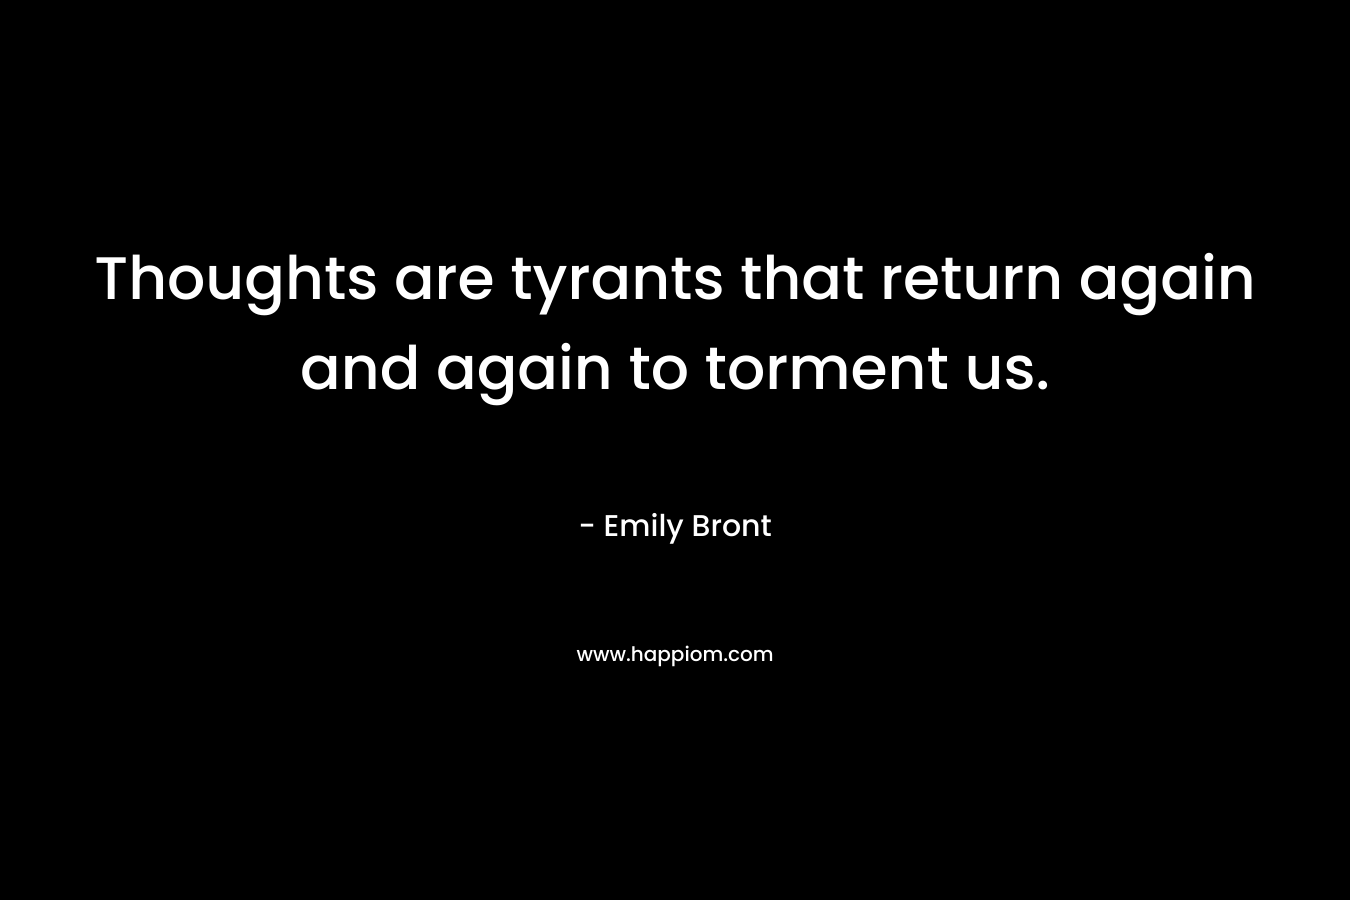 Thoughts are tyrants that return again and again to torment us.